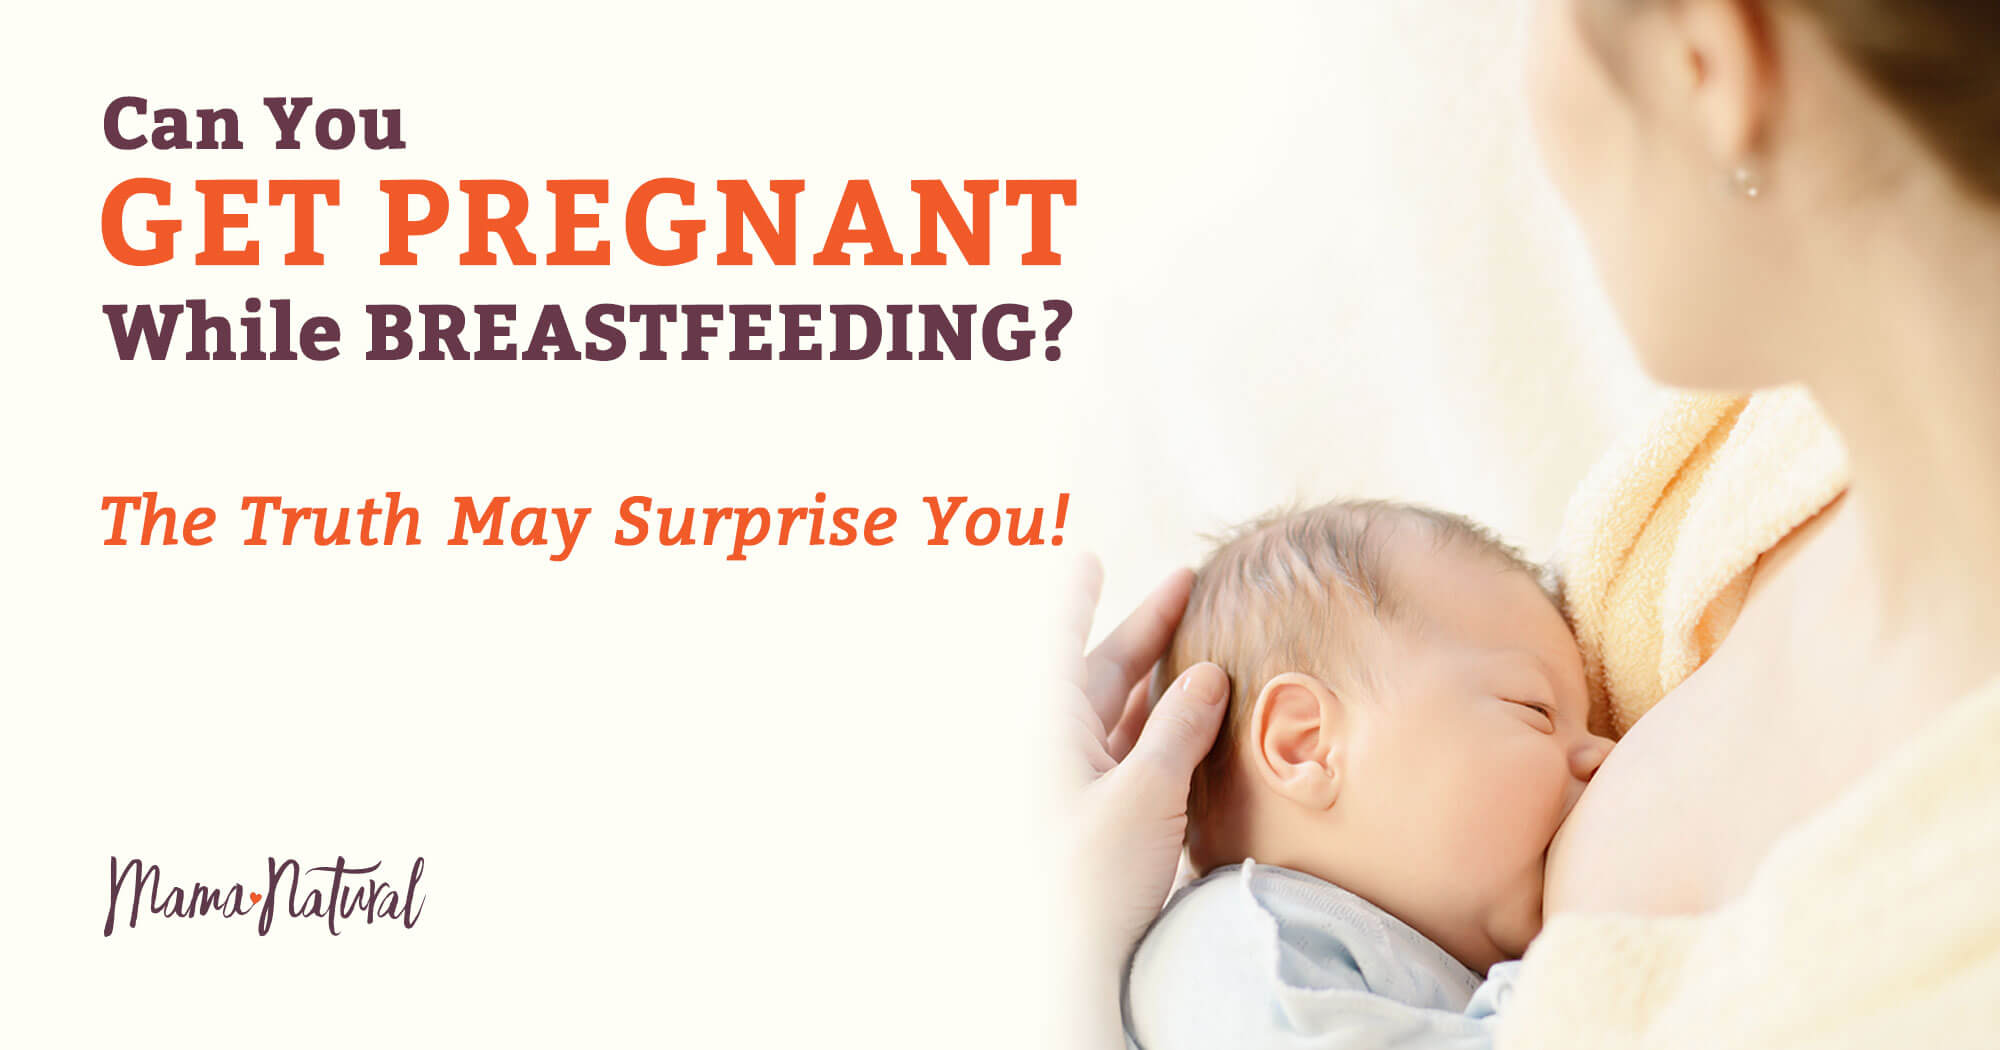 Can You Get Pregnant While Breastfeeding? The Truth May Surprise You!